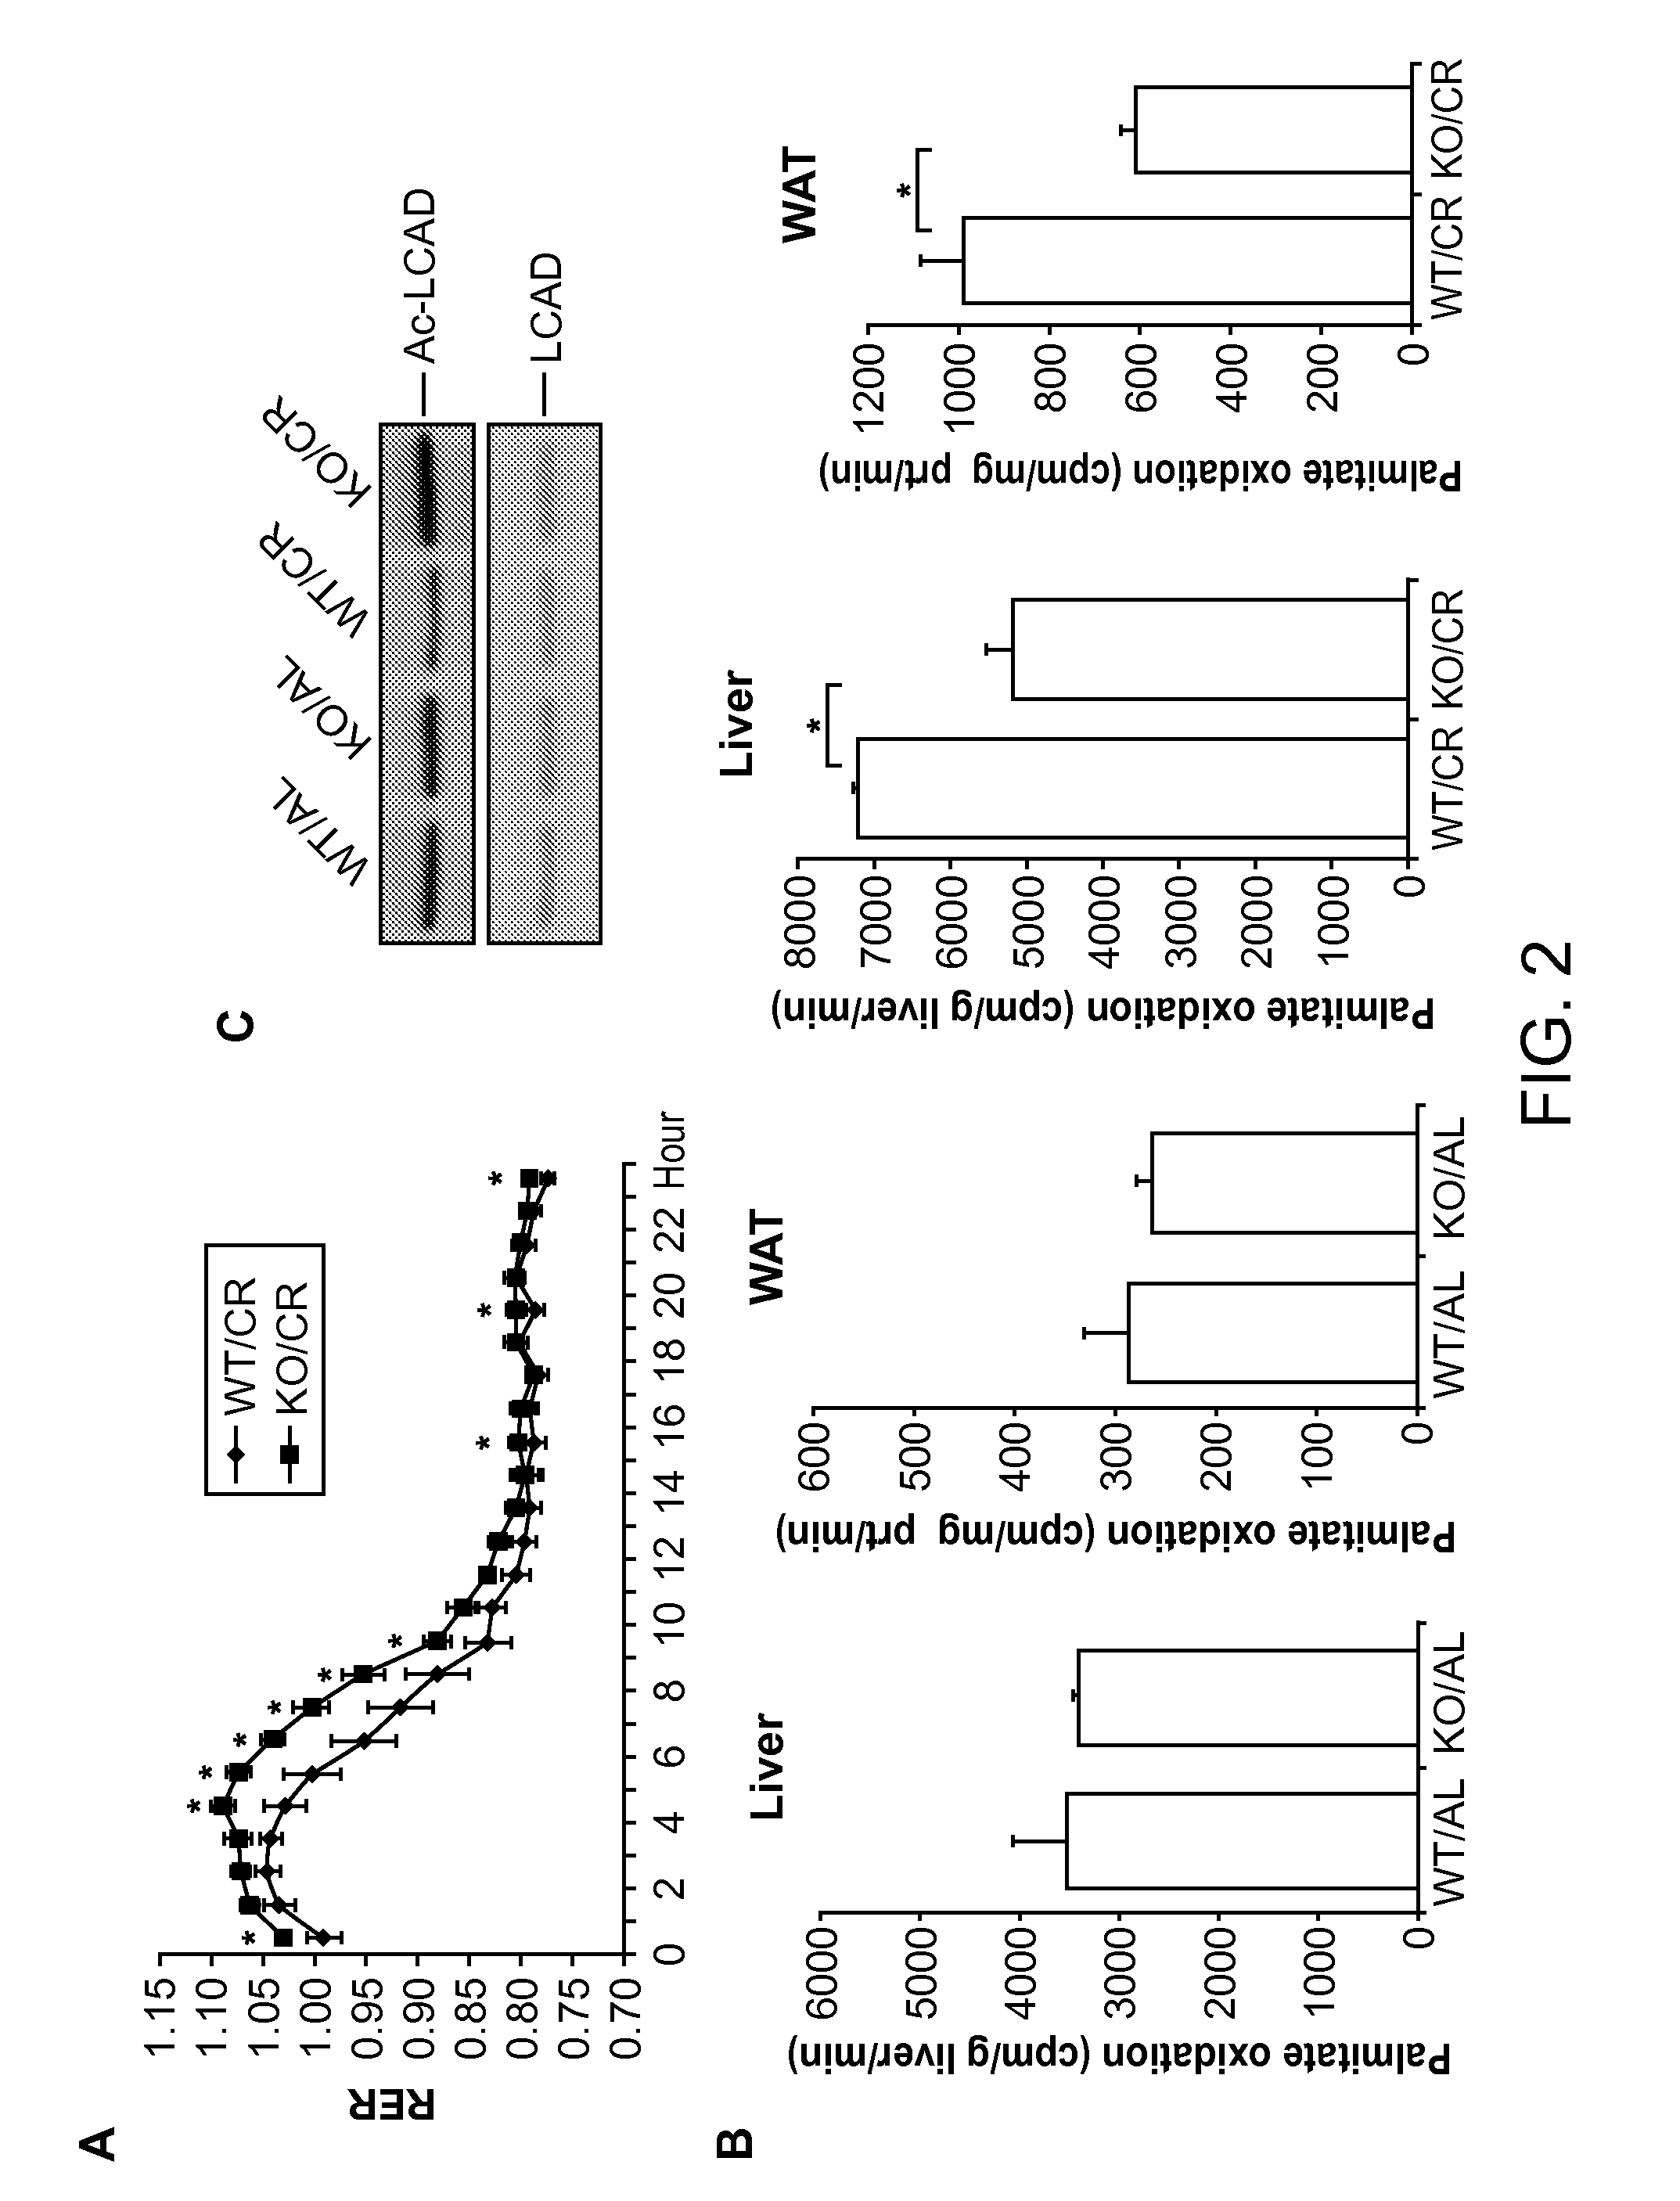 Superoxide dismutase variants and methods of use thereof